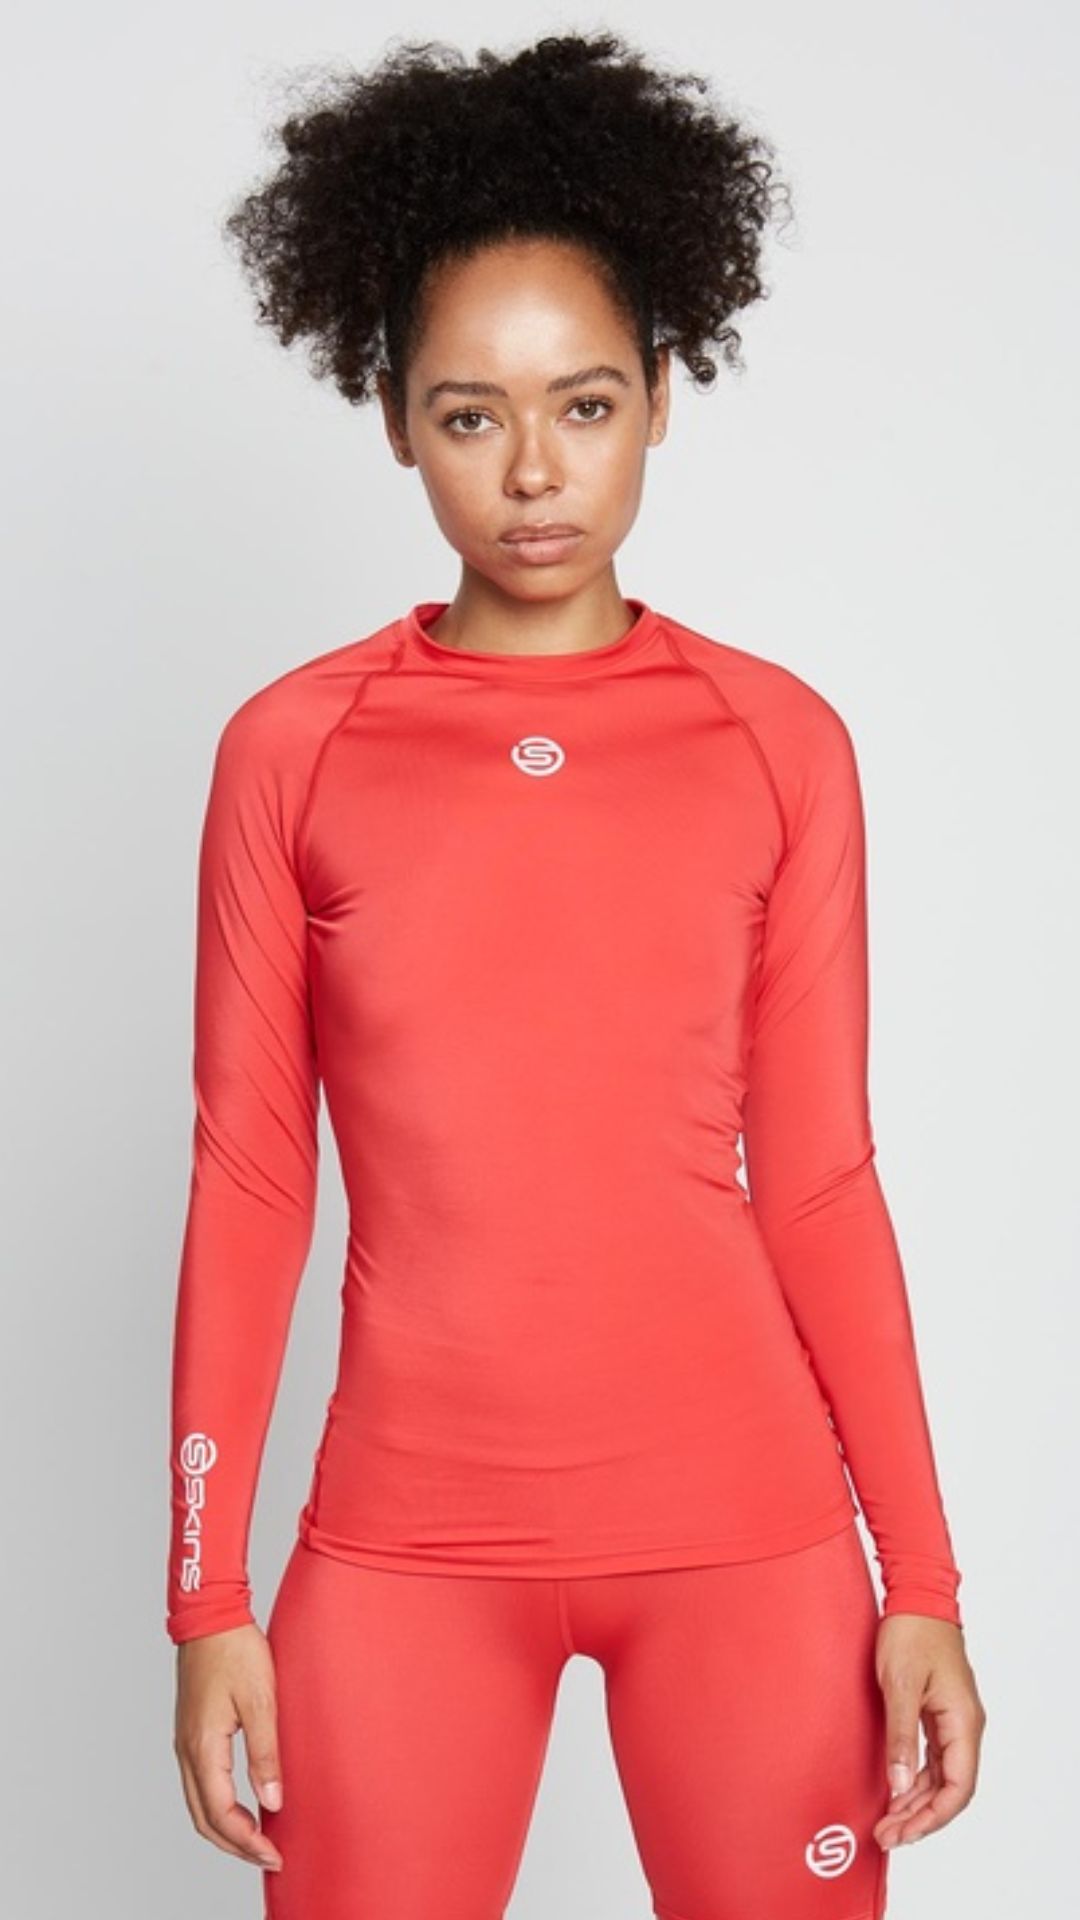 a woman with a curly high ponytail wears a red Long-sleeve Womens Activewear Top